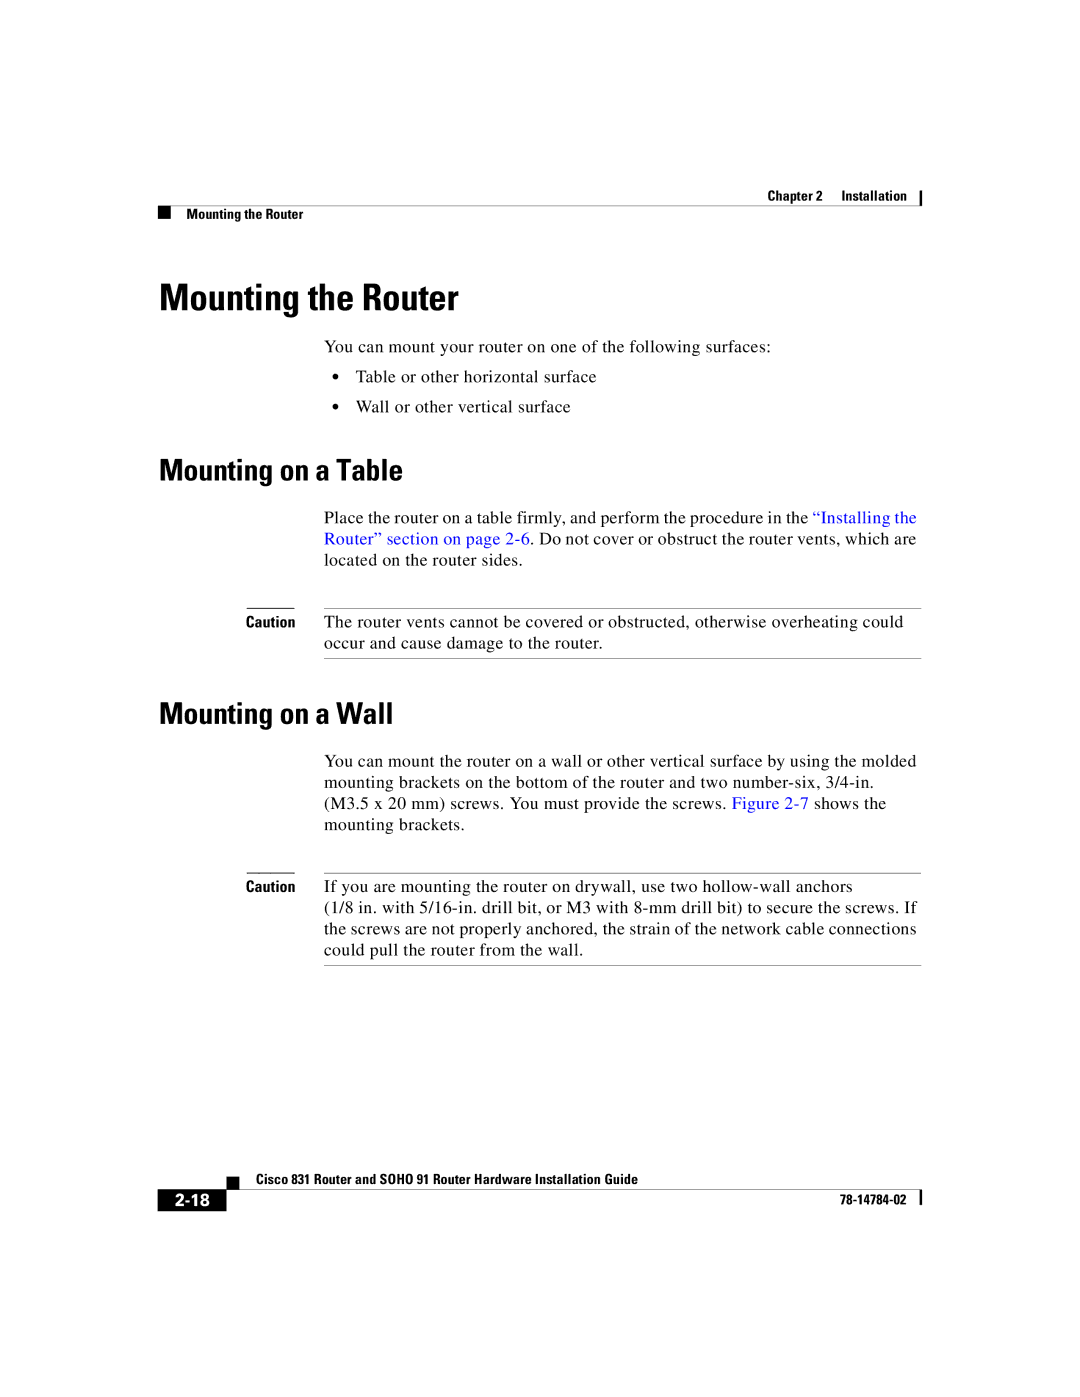 Cisco Systems Cisco 831 manual Mounting the Router, Mounting on a Table, Mounting on a Wall 